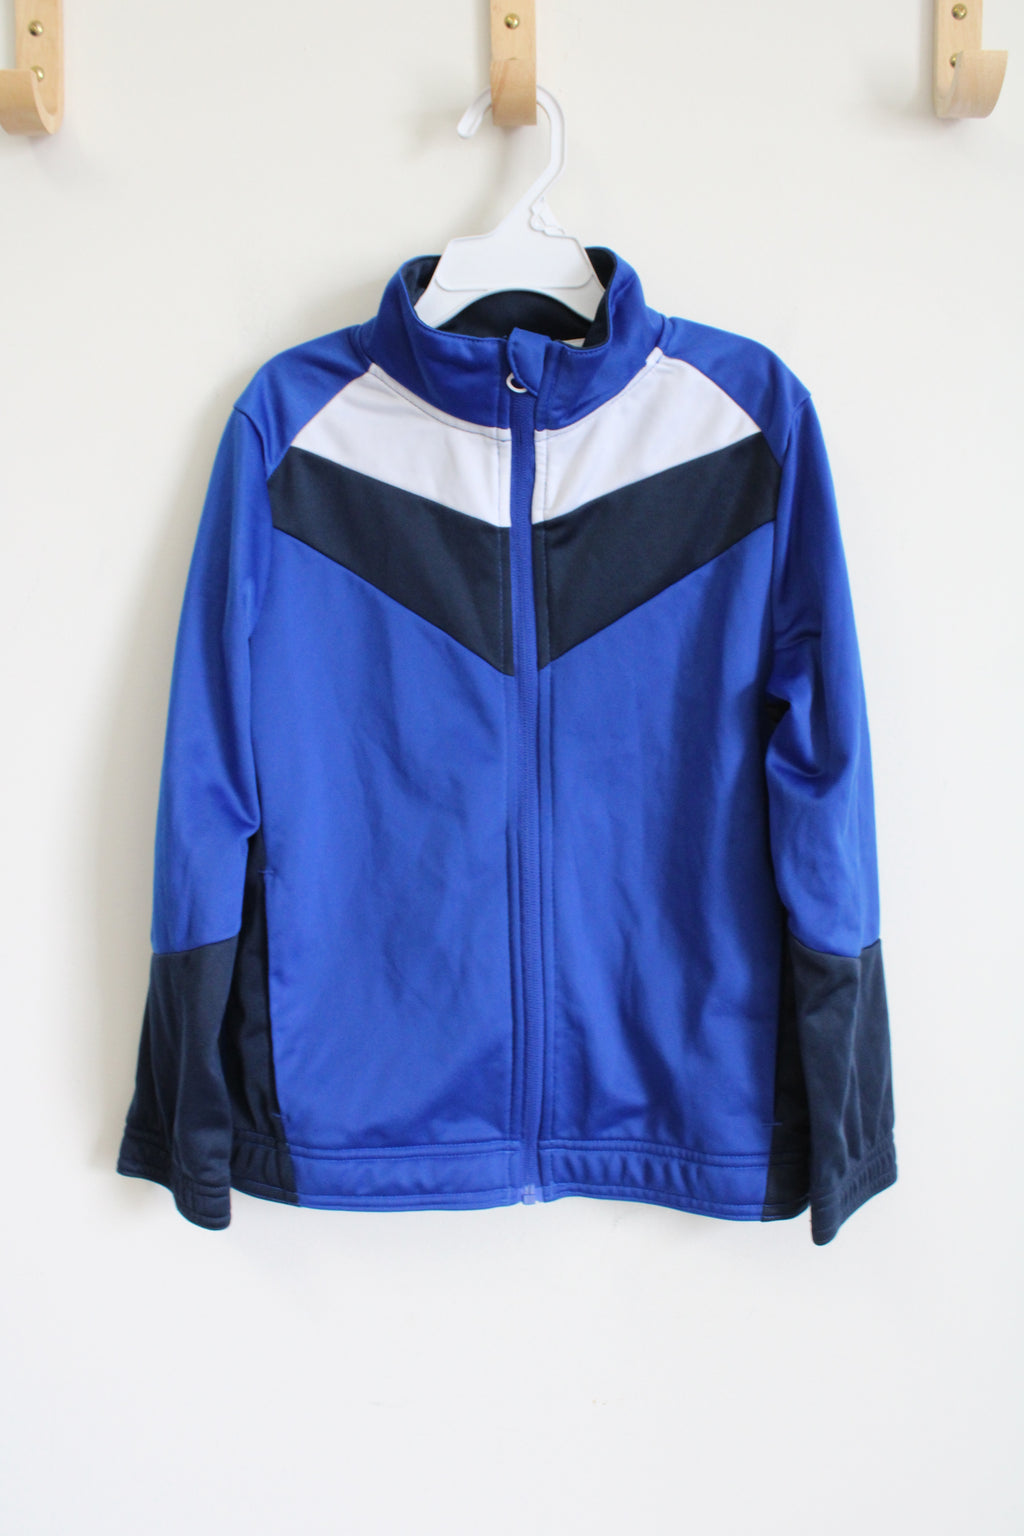 Athletic Works Blue Zip Up Lightweight Jacket | Youth M (8)